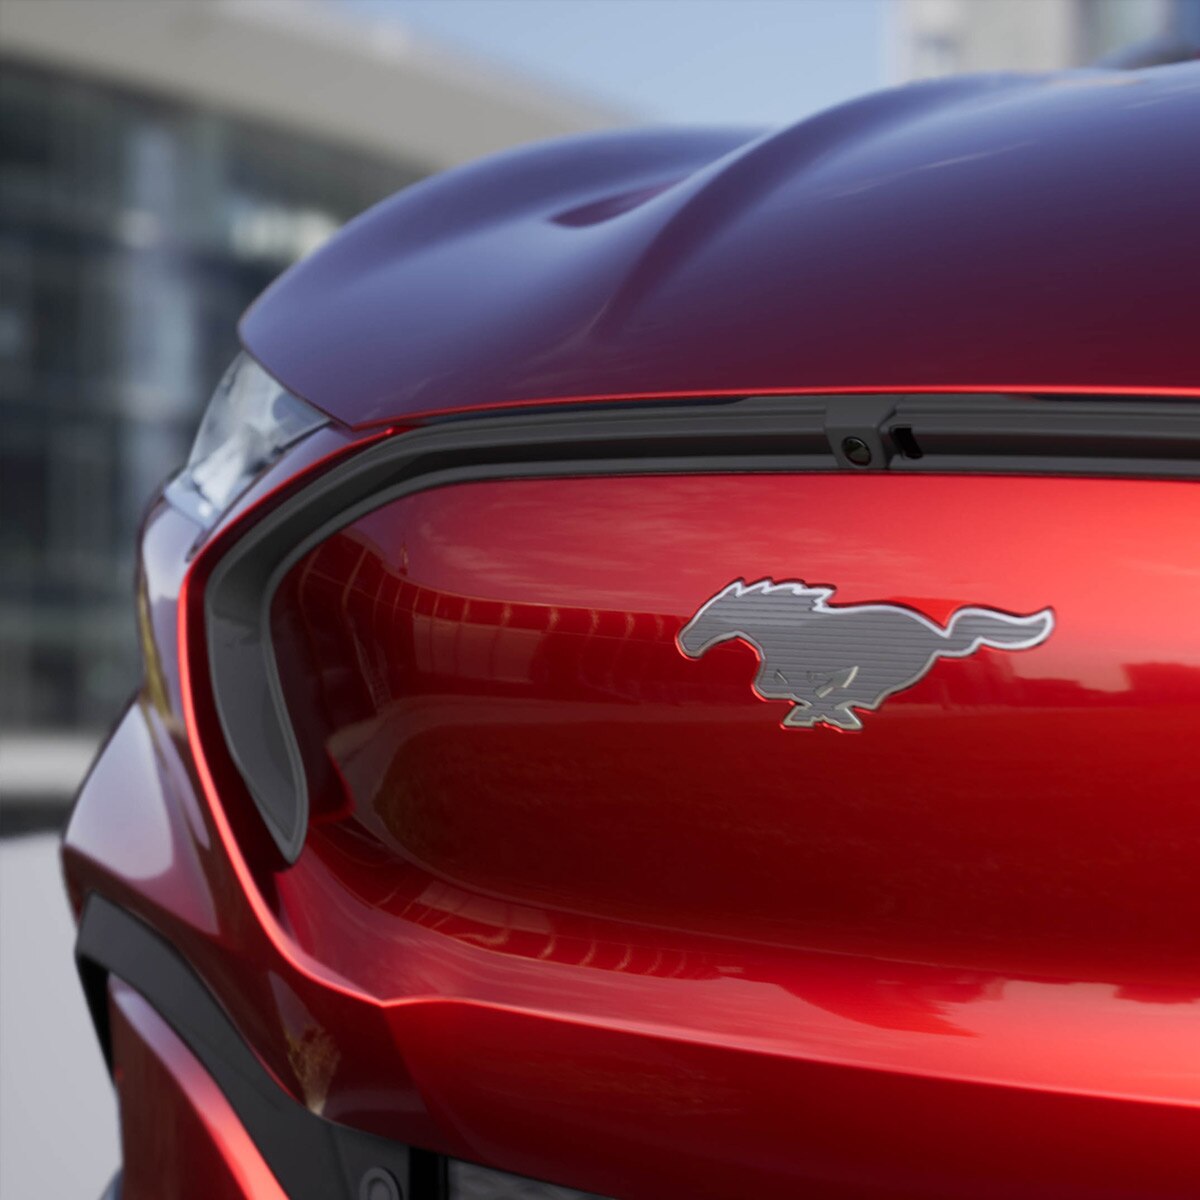 All-New Ford Mustang Mach-E AWD model close up on Pony badge